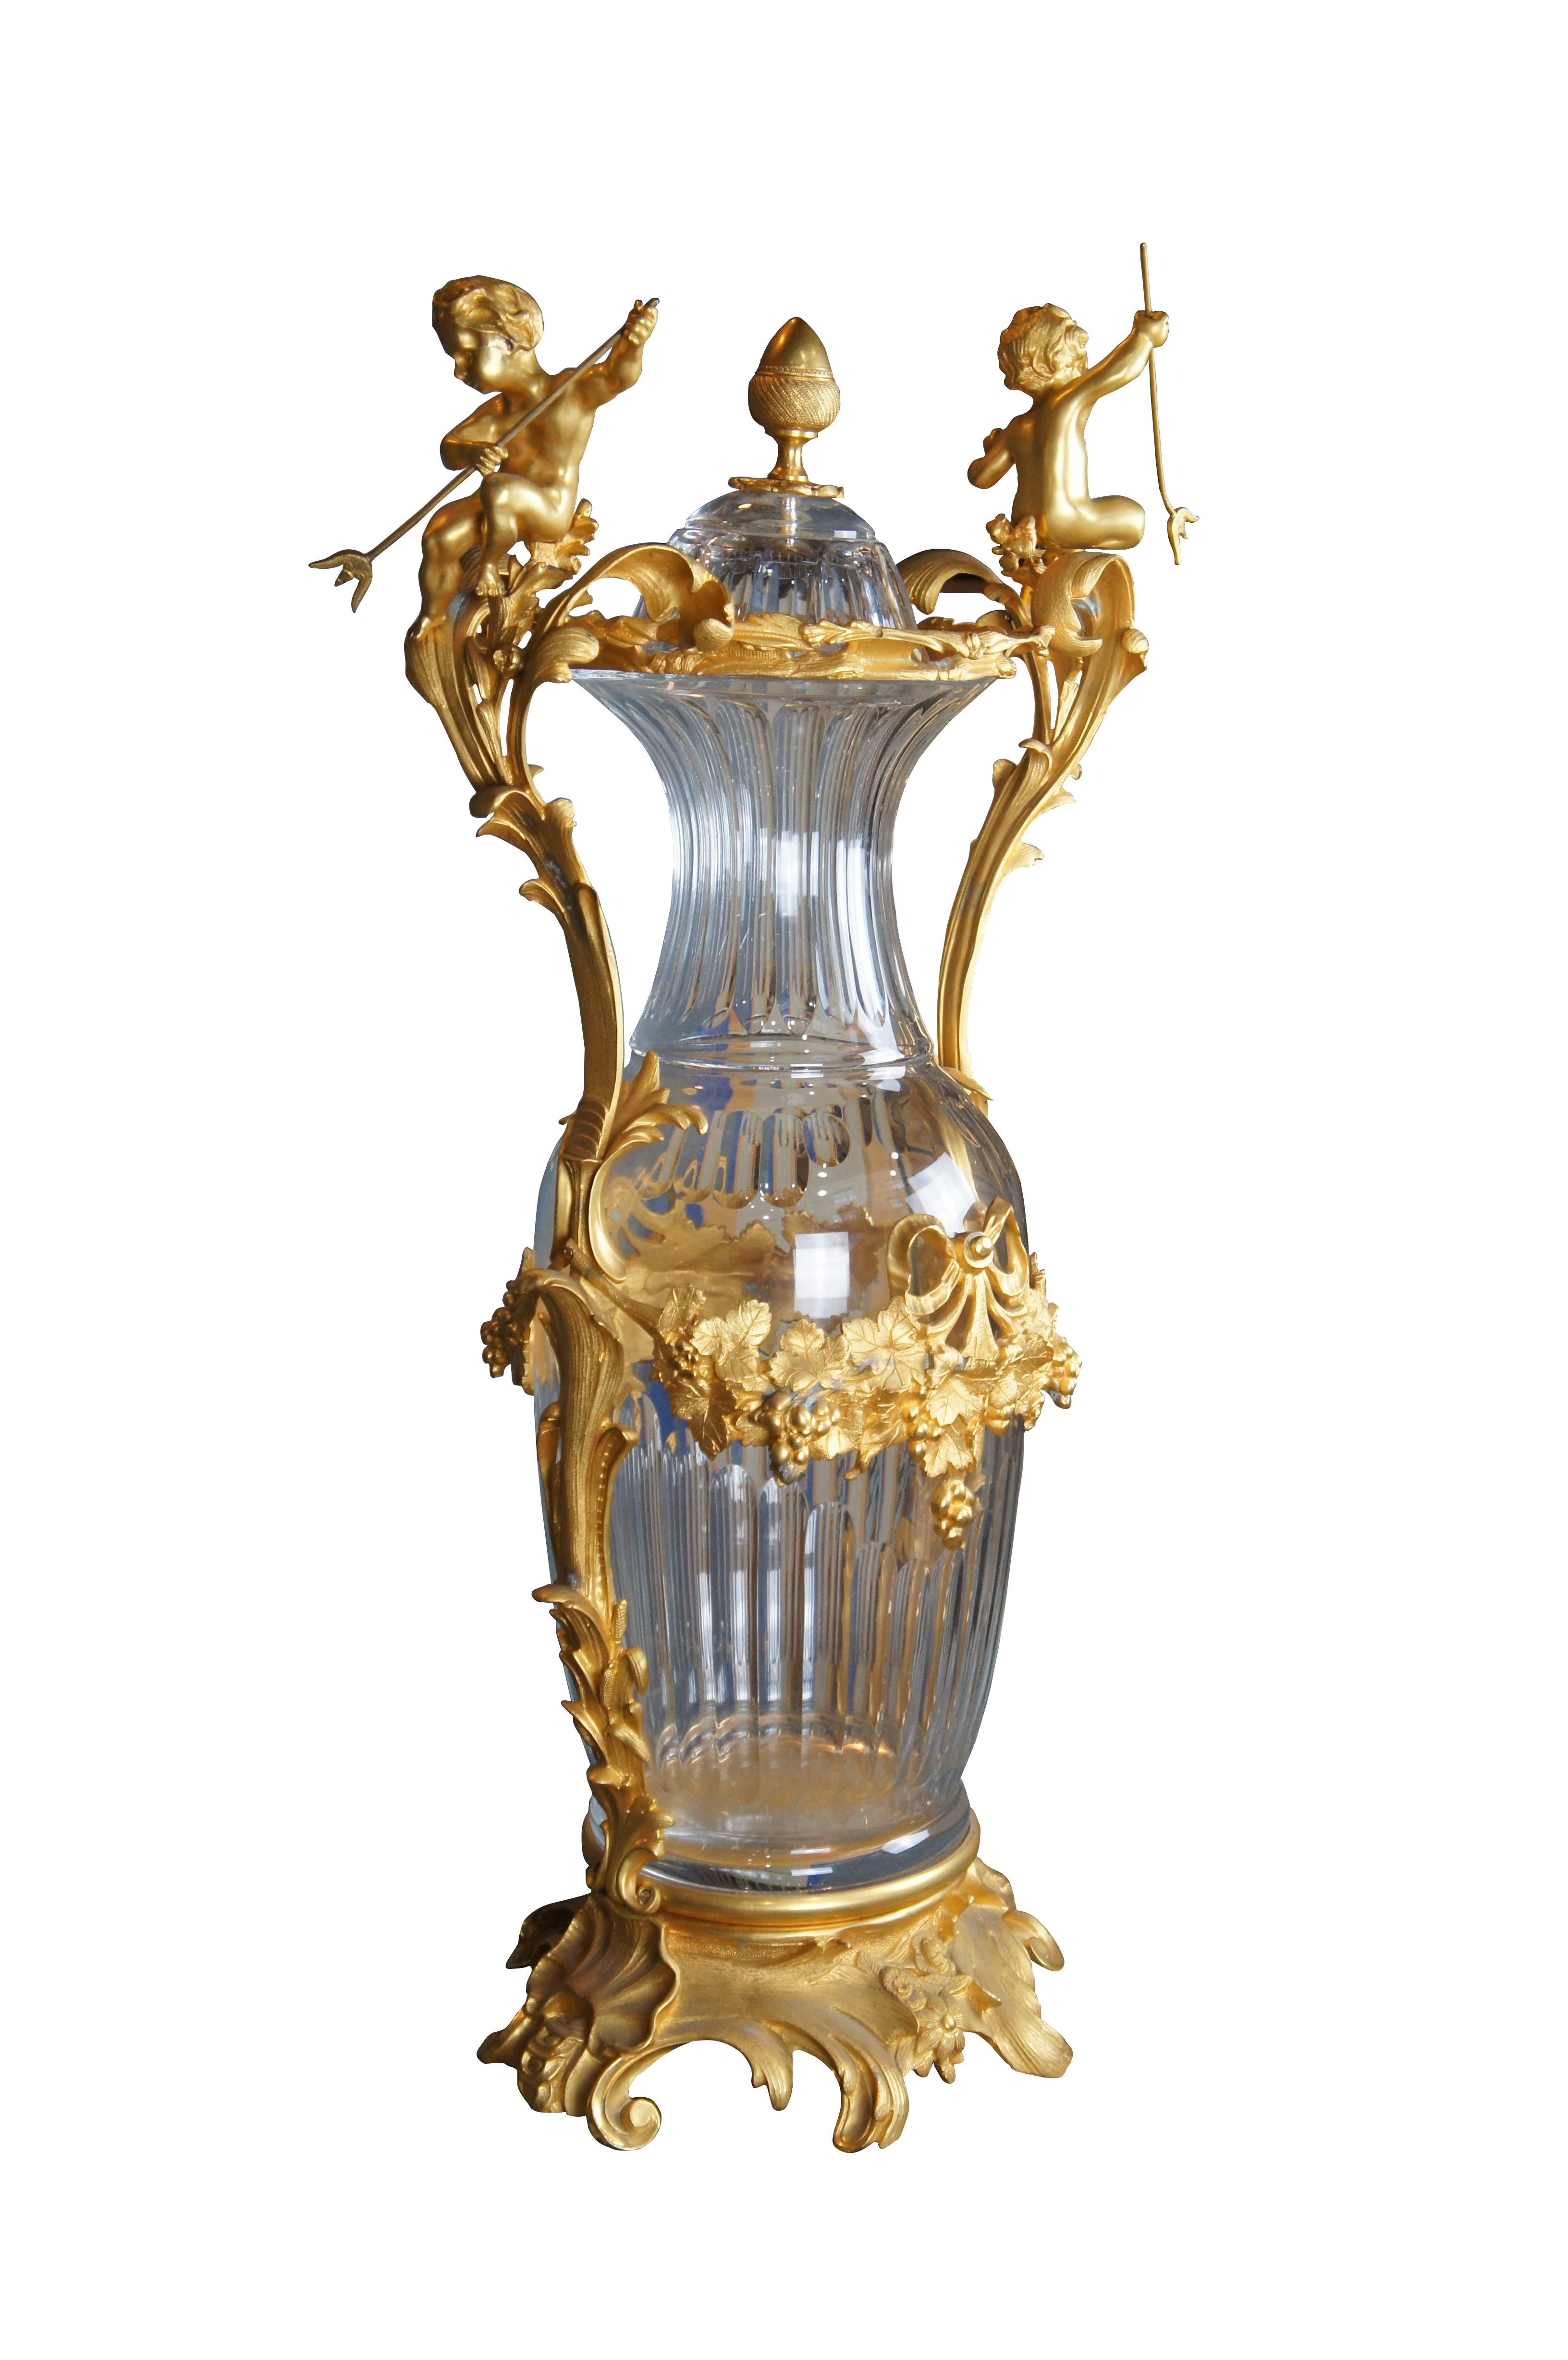 Late 20th Century Eric Stepnewski Centerpiece / Vase. Crafted from chiseled brass ormolu finished in 24k gold and crystal. Features a fluted cut crystal body decorated by 2 cherubs holding a trident and garlands of vines with grapes

Eric